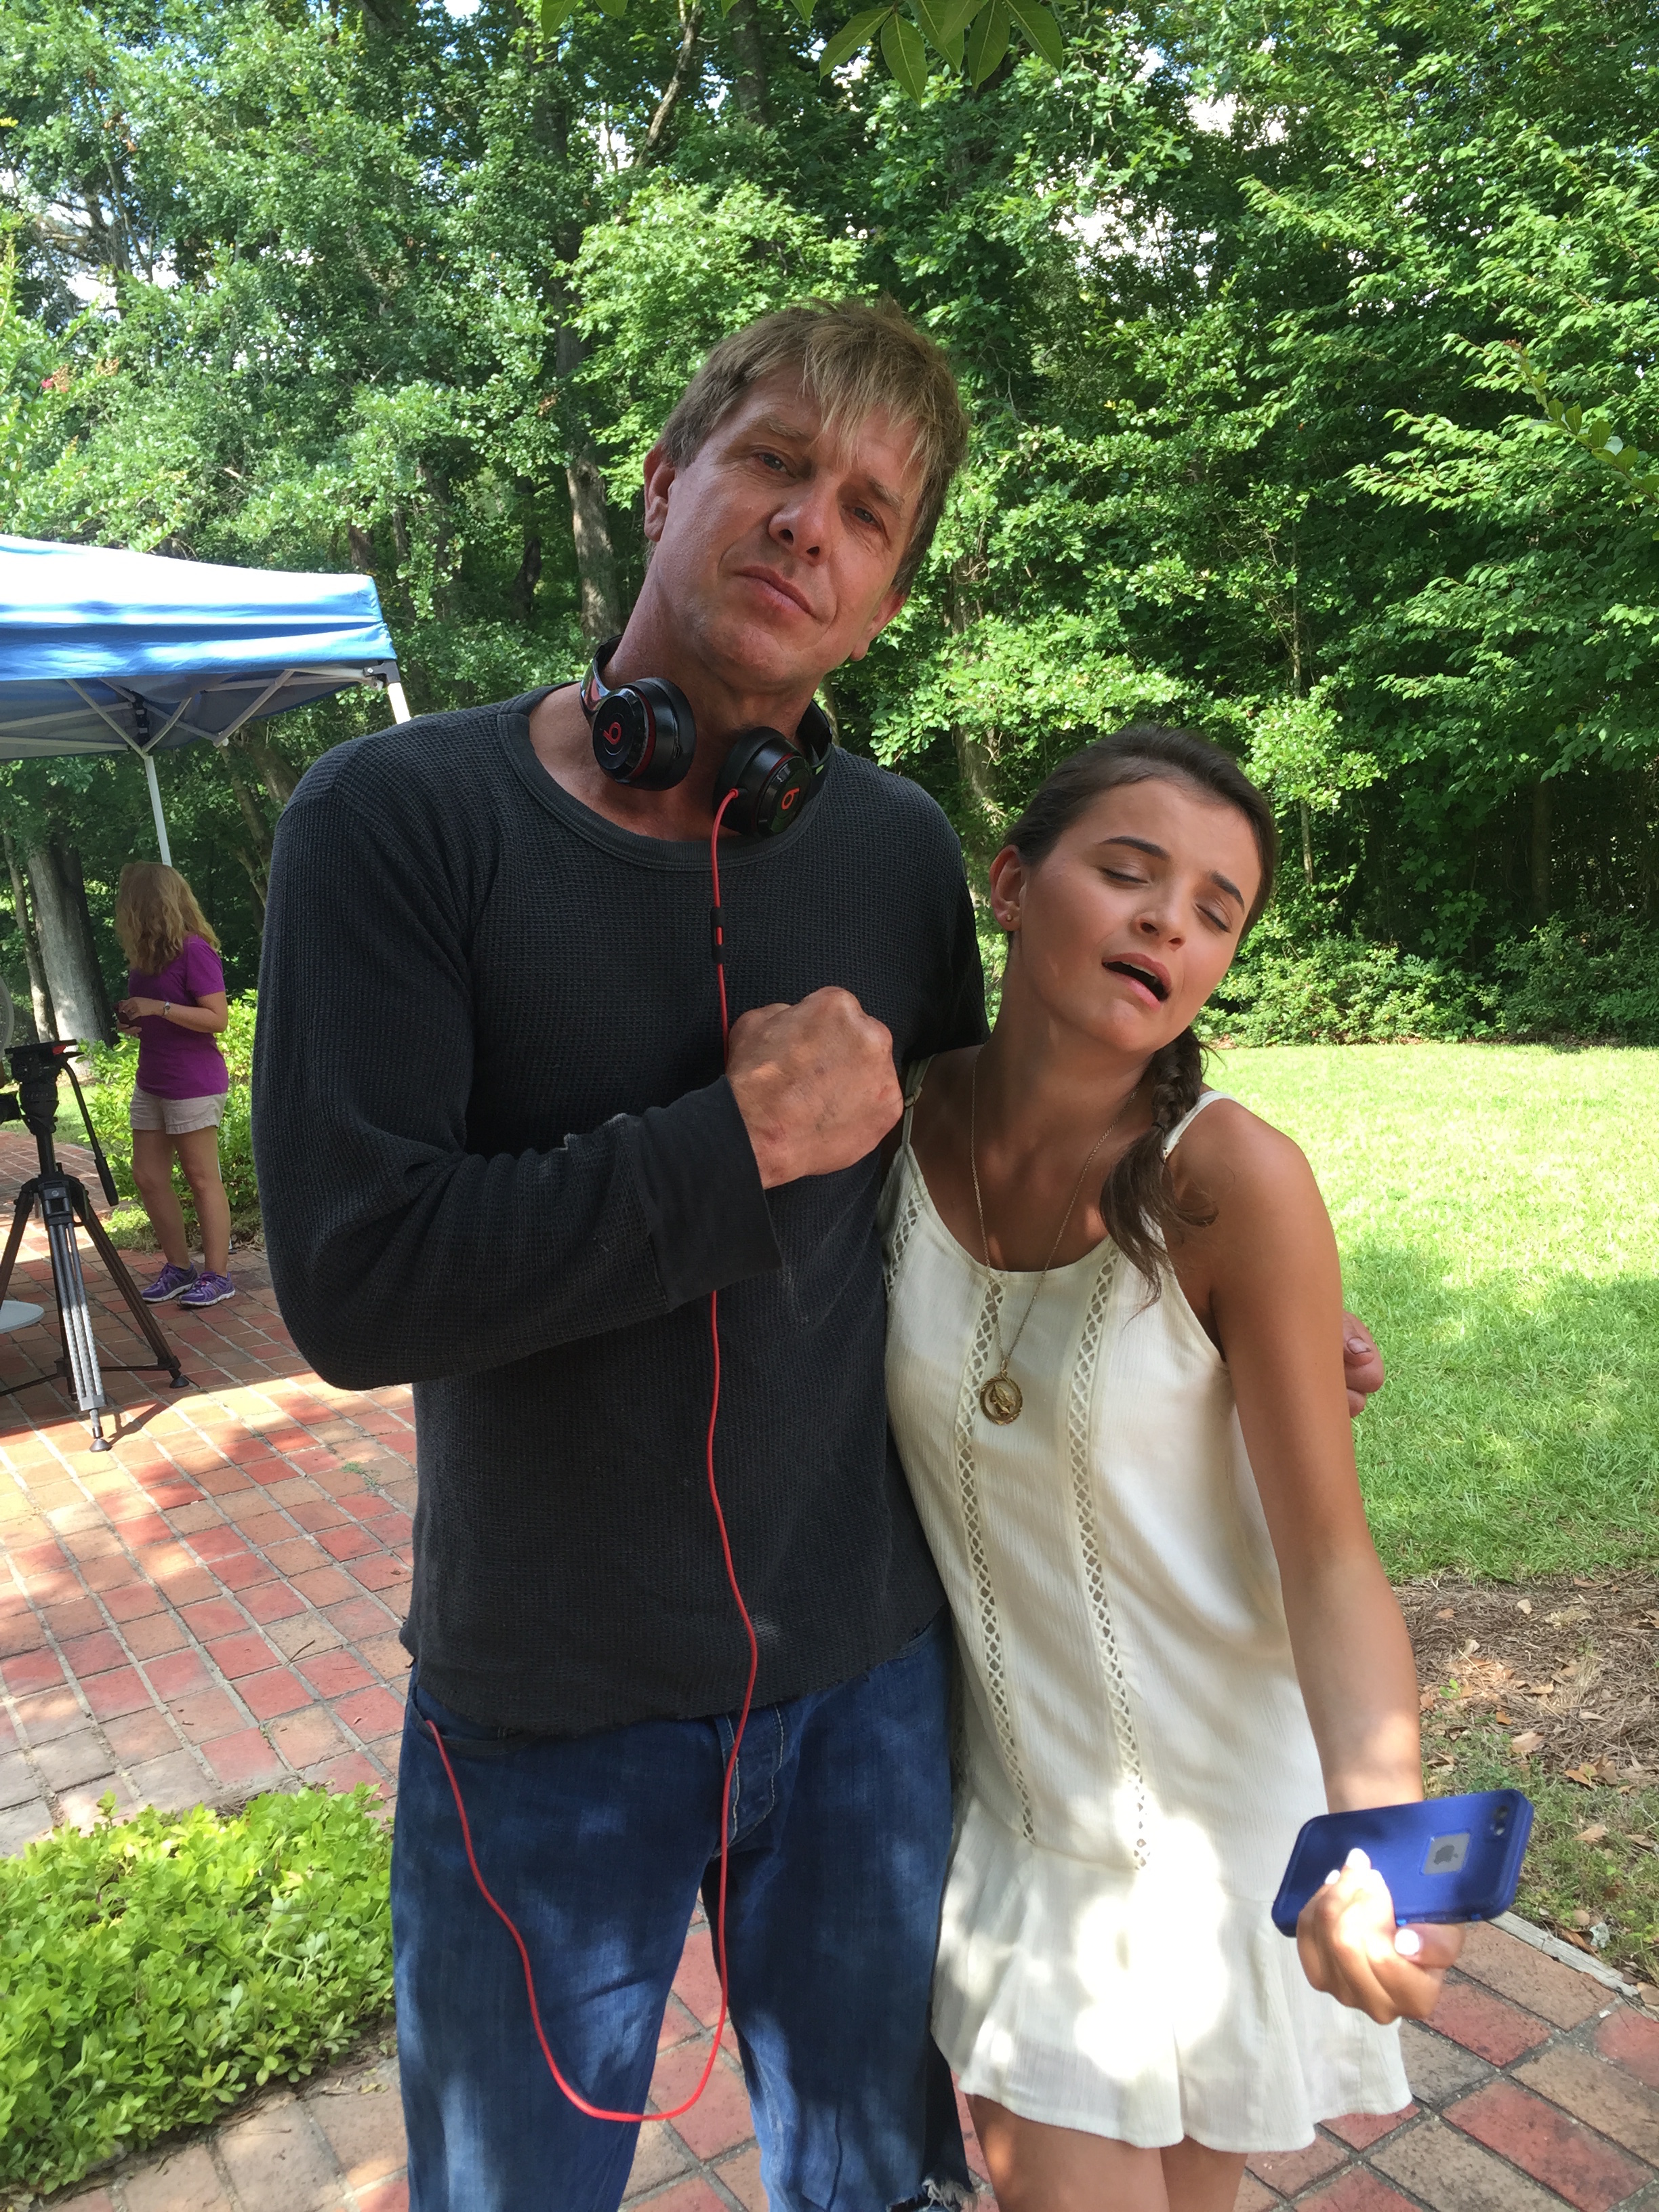 Kenny Johnson and Alessandra Panepinto on the set of Checkpoint